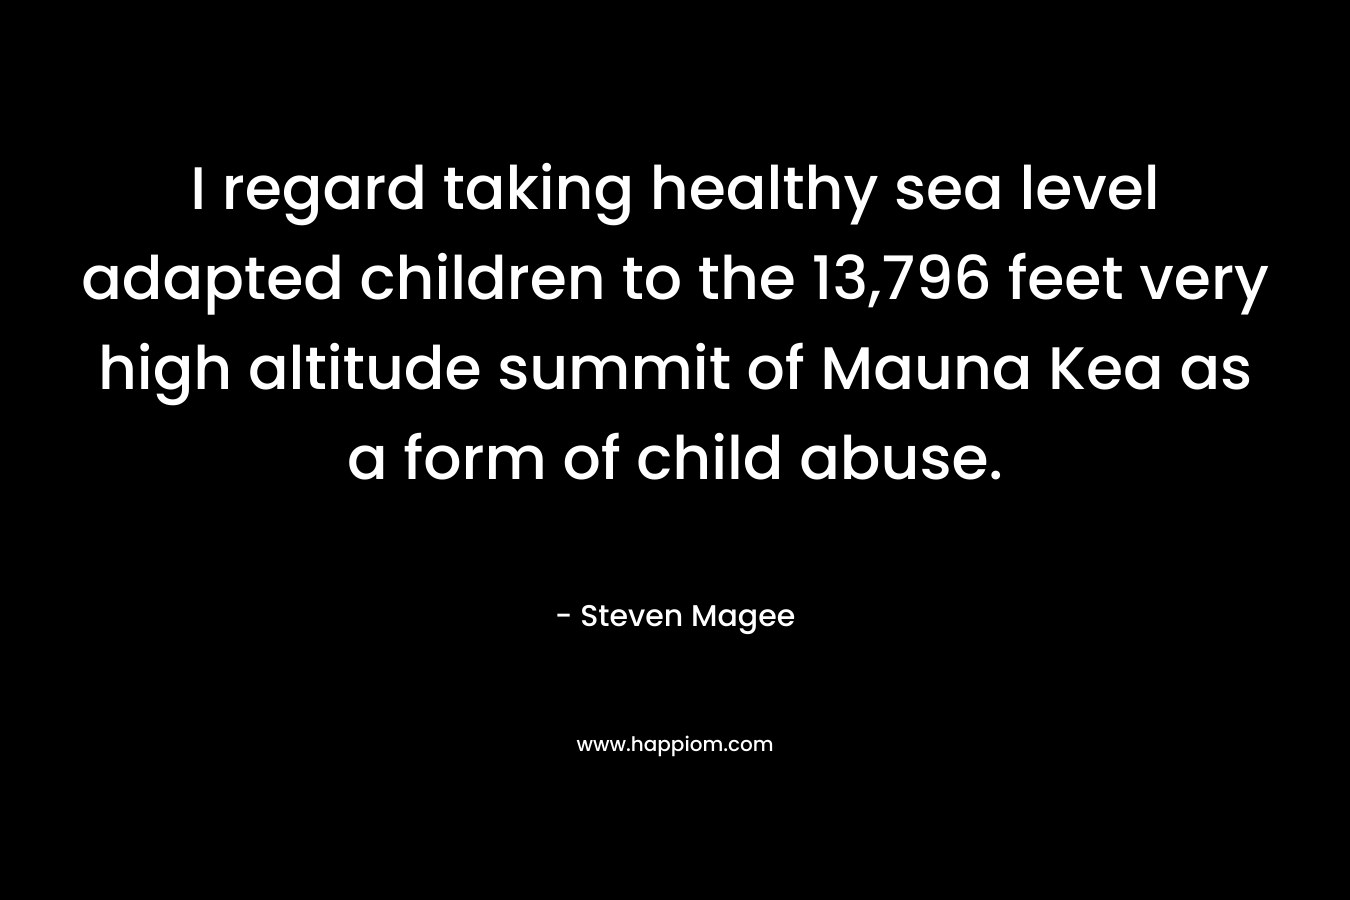 I regard taking healthy sea level adapted children to the 13,796 feet very high altitude summit of Mauna Kea as a form of child abuse. – Steven Magee